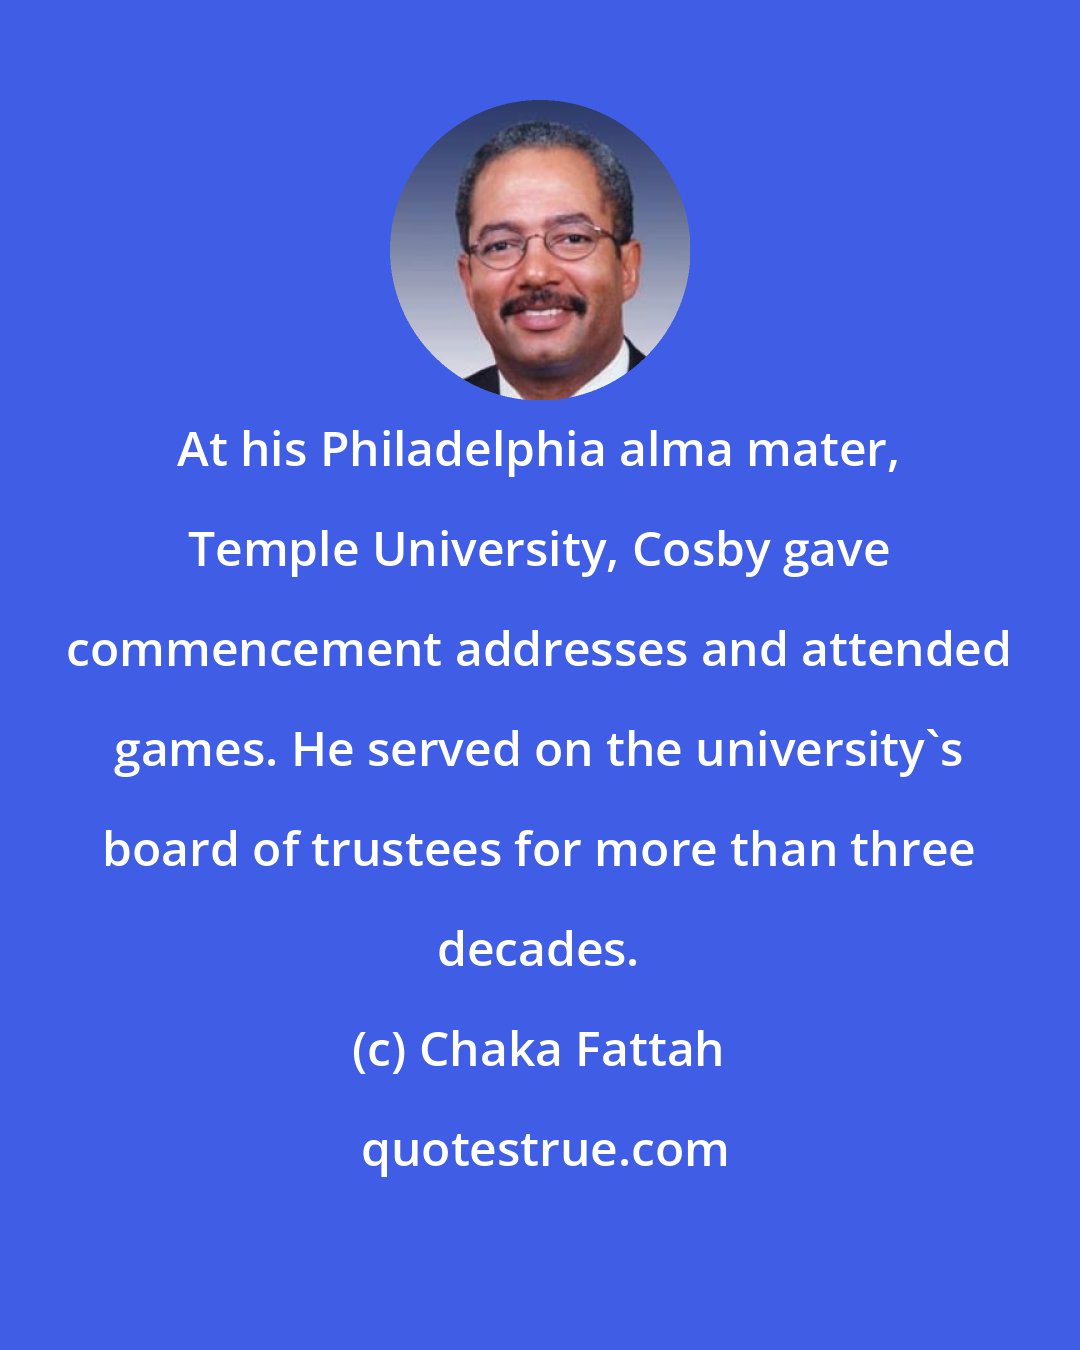 Chaka Fattah: At his Philadelphia alma mater, Temple University, Cosby gave commencement addresses and attended games. He served on the university`s board of trustees for more than three decades.